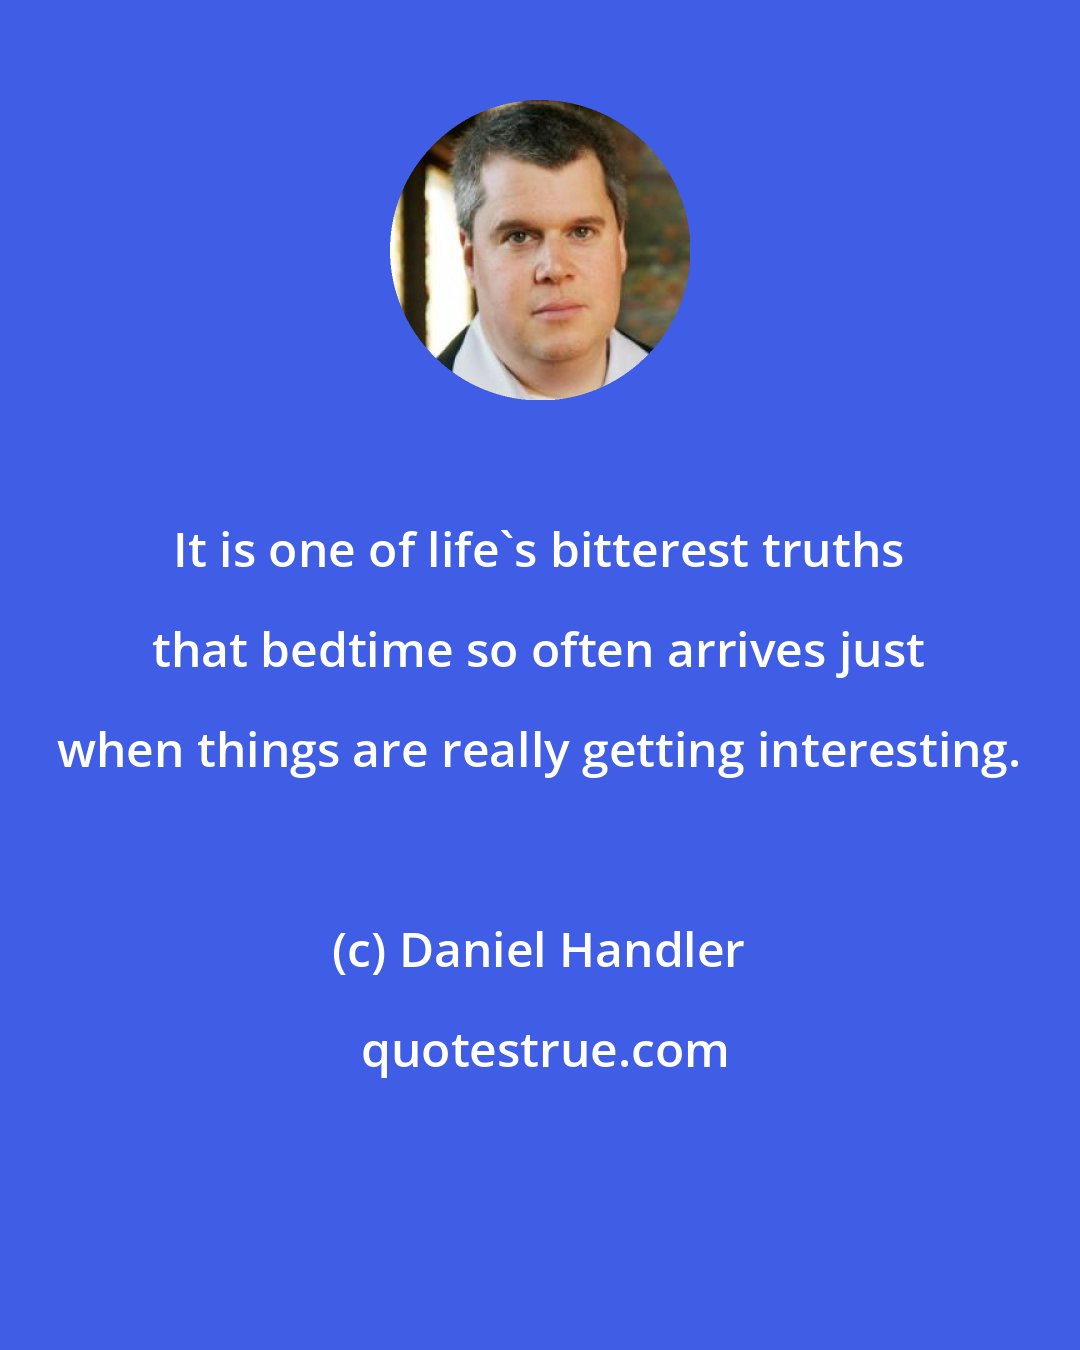 Daniel Handler: It is one of life's bitterest truths that bedtime so often arrives just when things are really getting interesting.